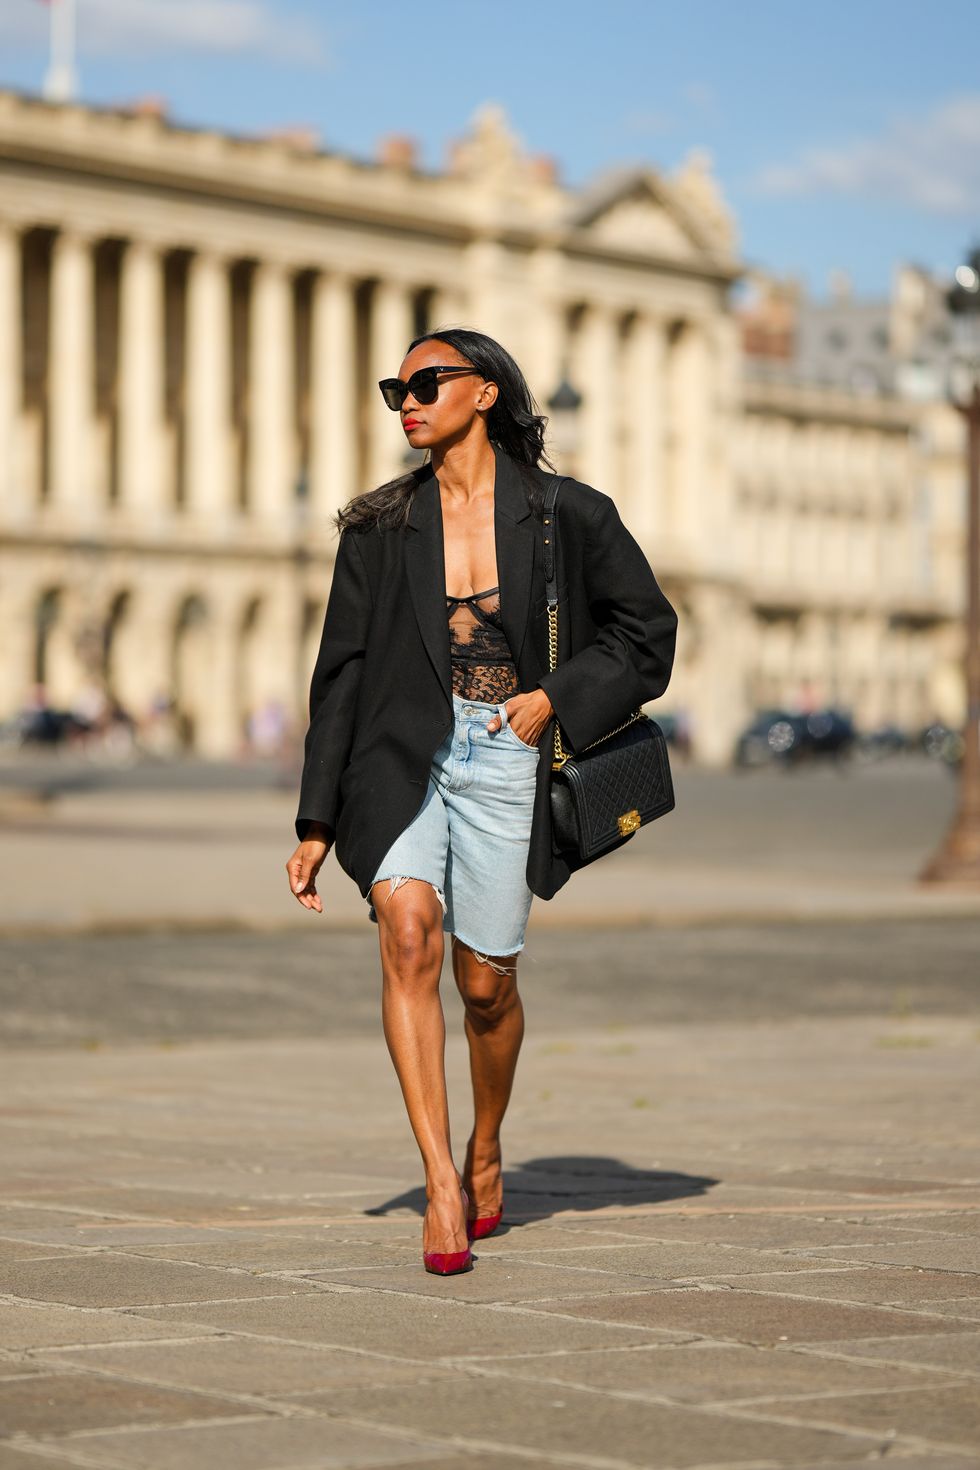 paris, france june 29 emilie joseph infashionwetrust wears black sunglasses, diamonds earrings, a black flower print pattern lace corset top, a black oversized blazer jacket from the frankieshop, blue denim ripped bermudas shorts, a black shiny leather large boy shoulder bag from chanel, gold bracelets, red shiny leather snake print pattern pointes pumps heels shoes from saint laurent paris, during a street style fashion photo session, on june 29, 2022 in paris, france photo by edward berthelotgetty images